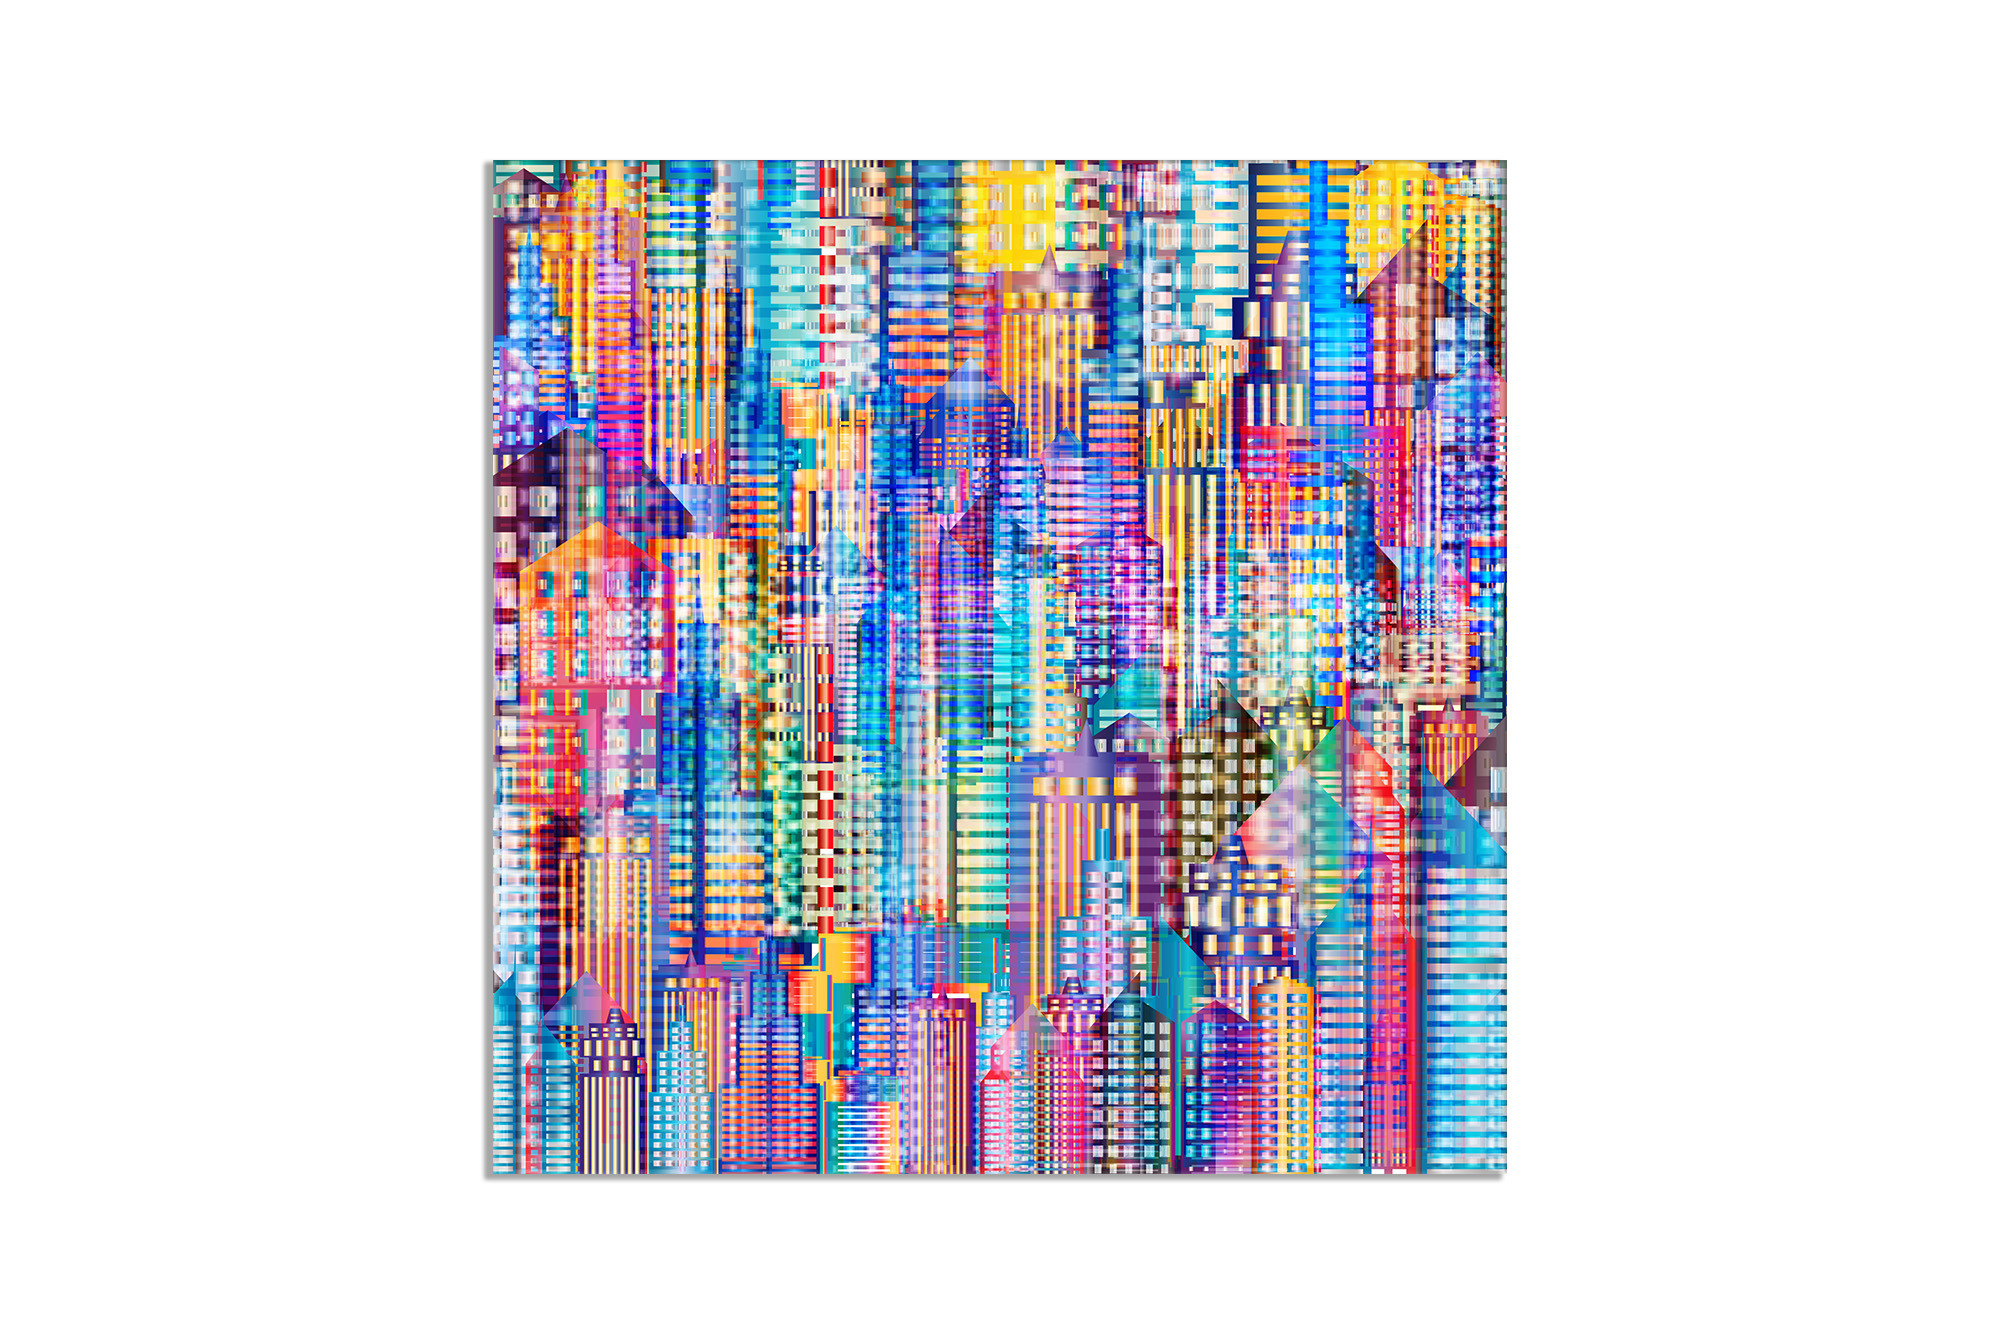 2000x1333 db-2431-modern-city-life-abstract-background-design_374756530- ...